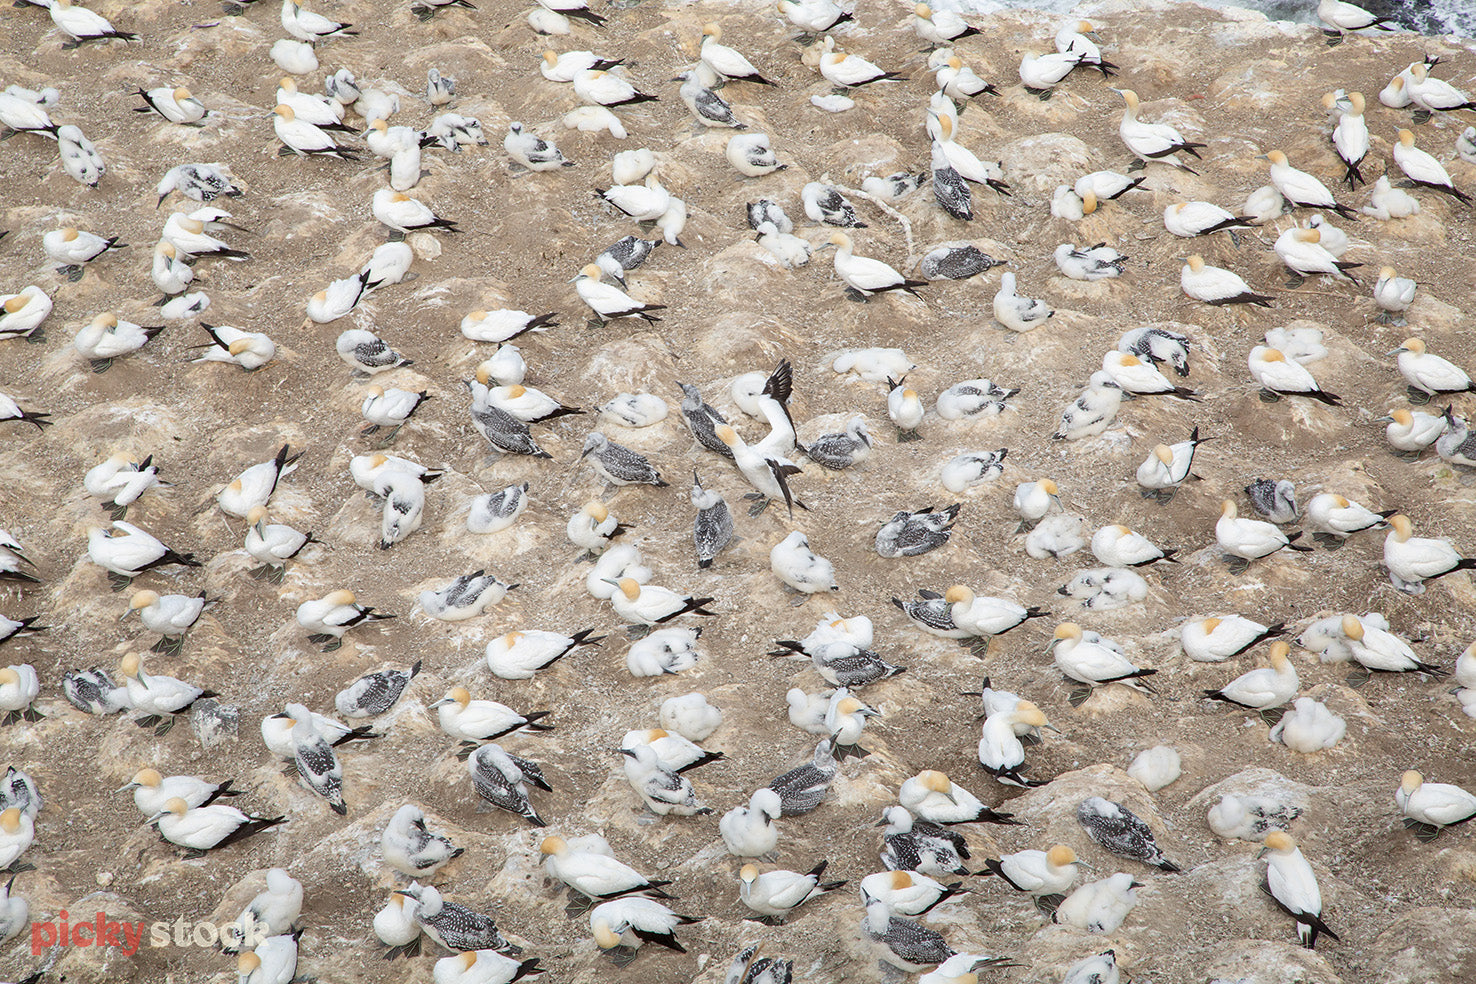 Muriwai's gannet colony seen from above forming graphic pattern.